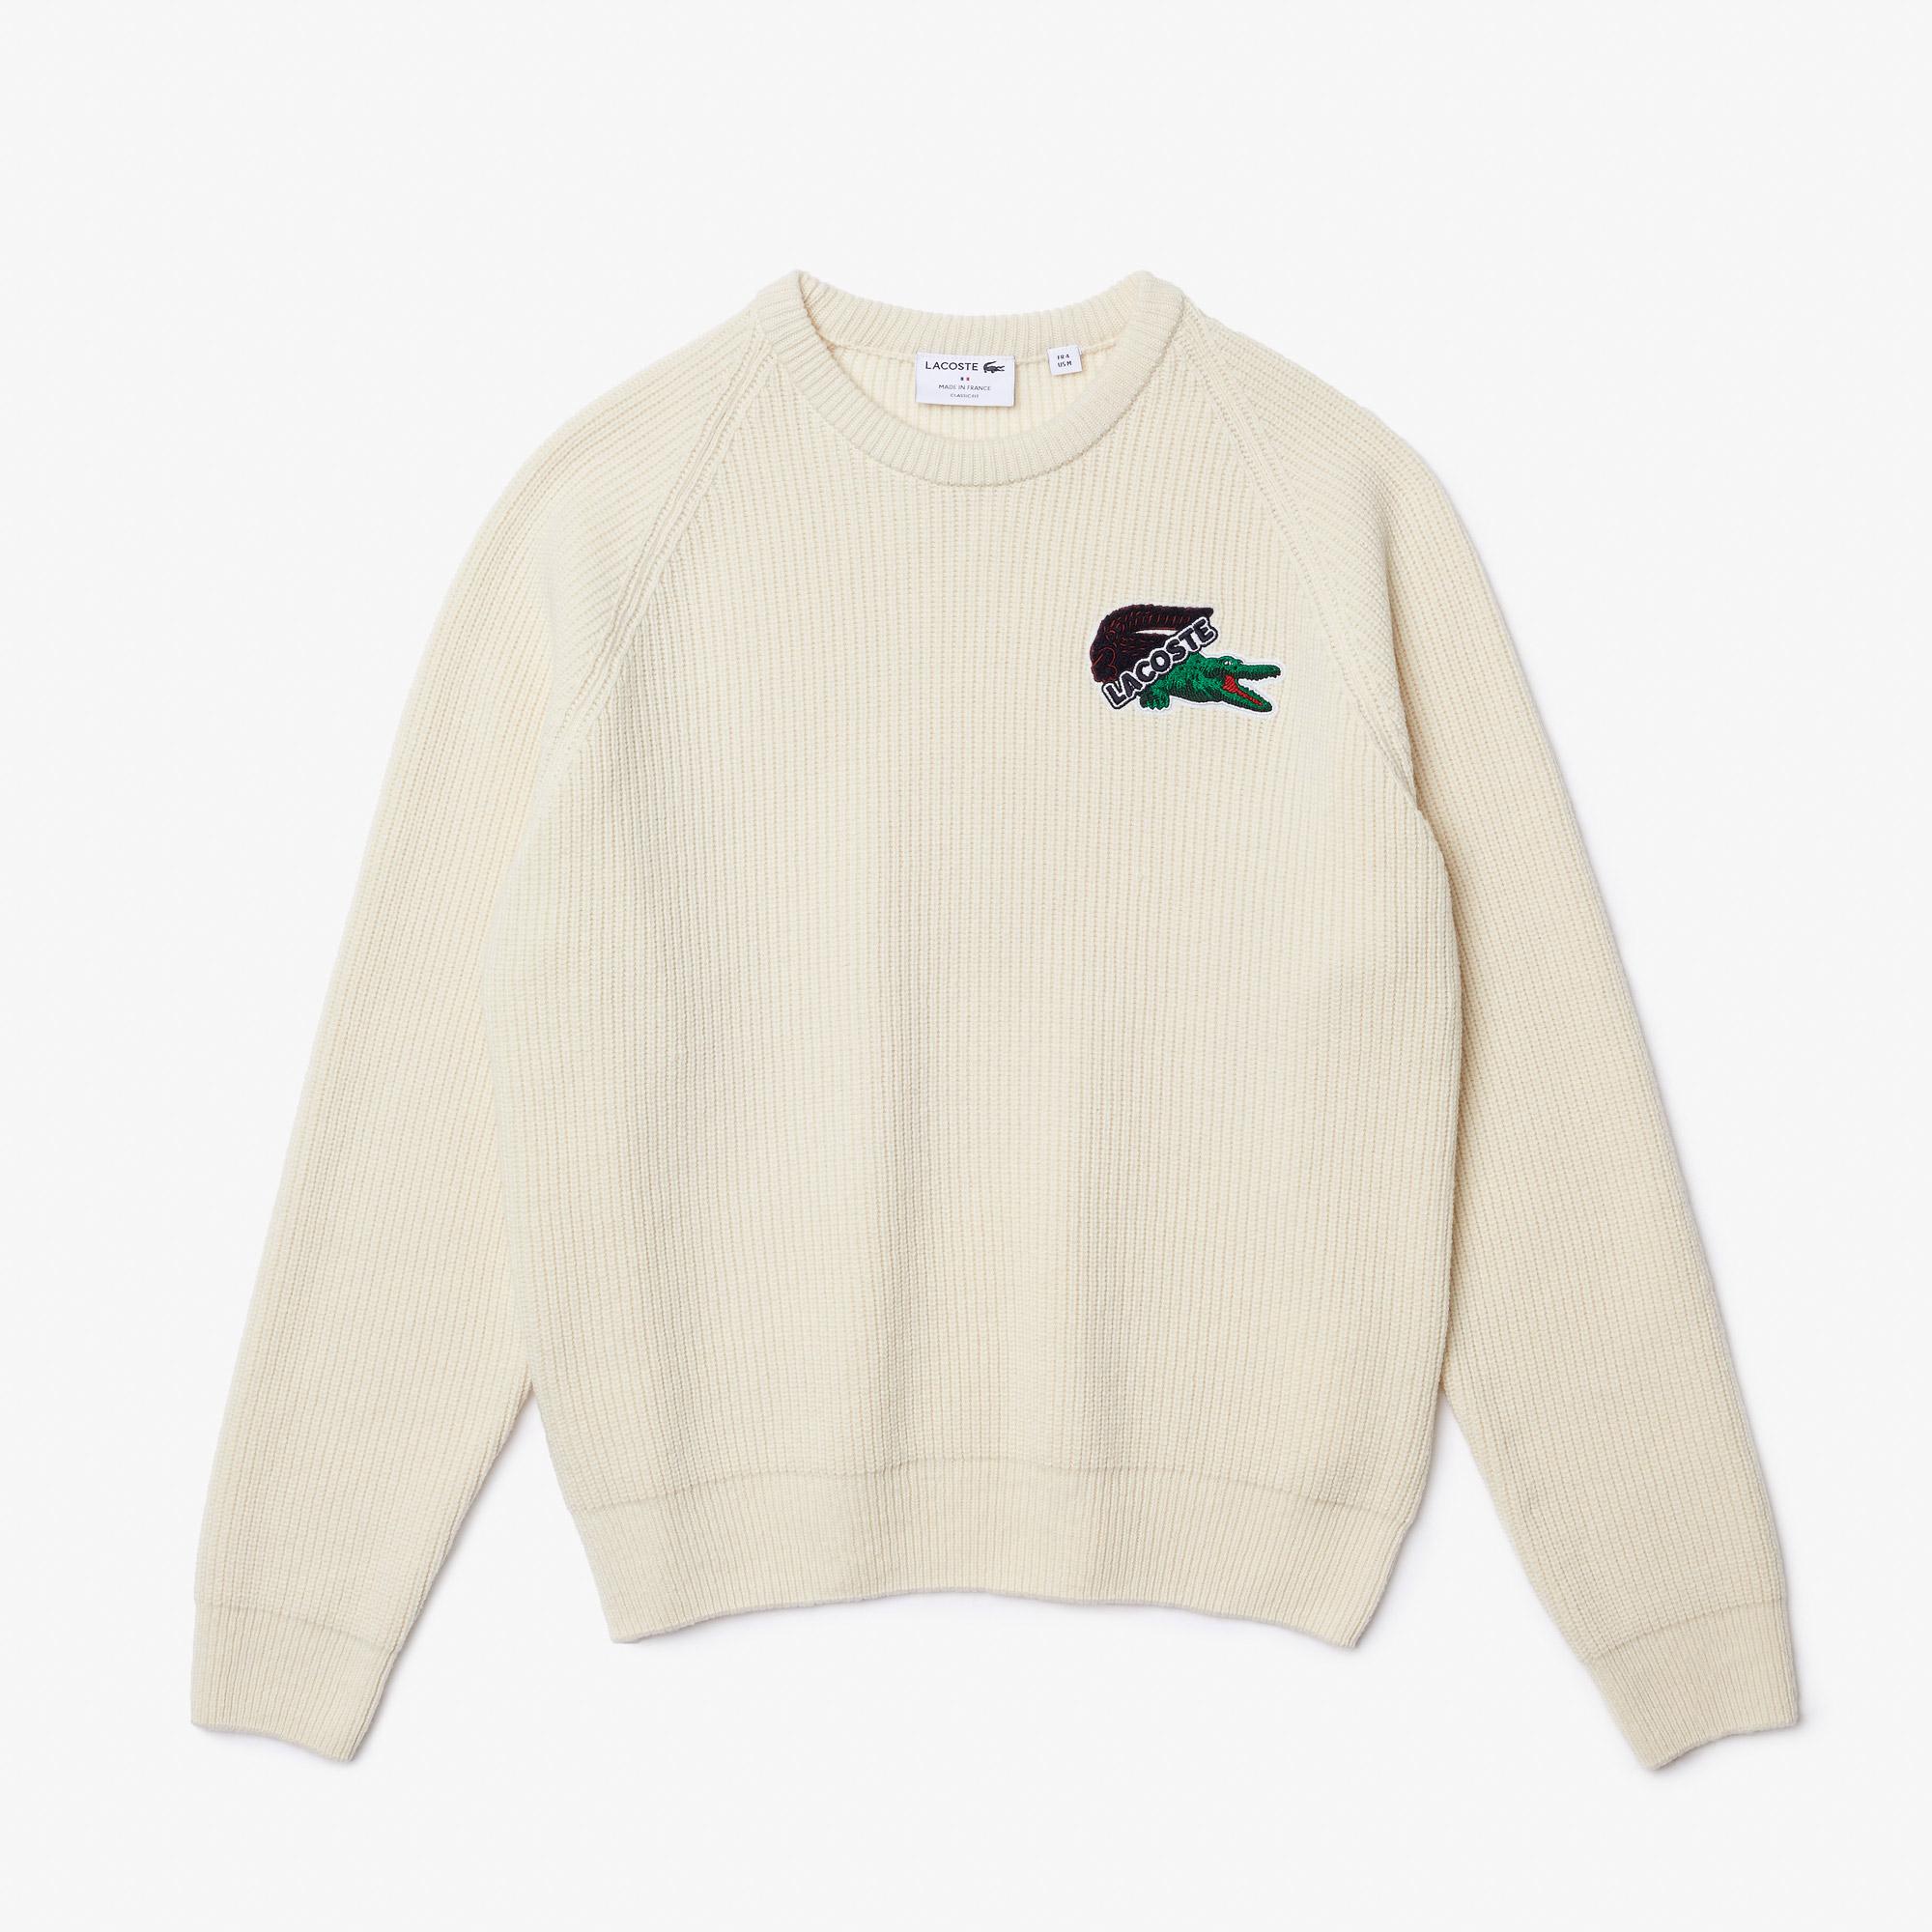 Lacoste Men's Holiday Large Crocodile Sweater AH0734 | Lacoste